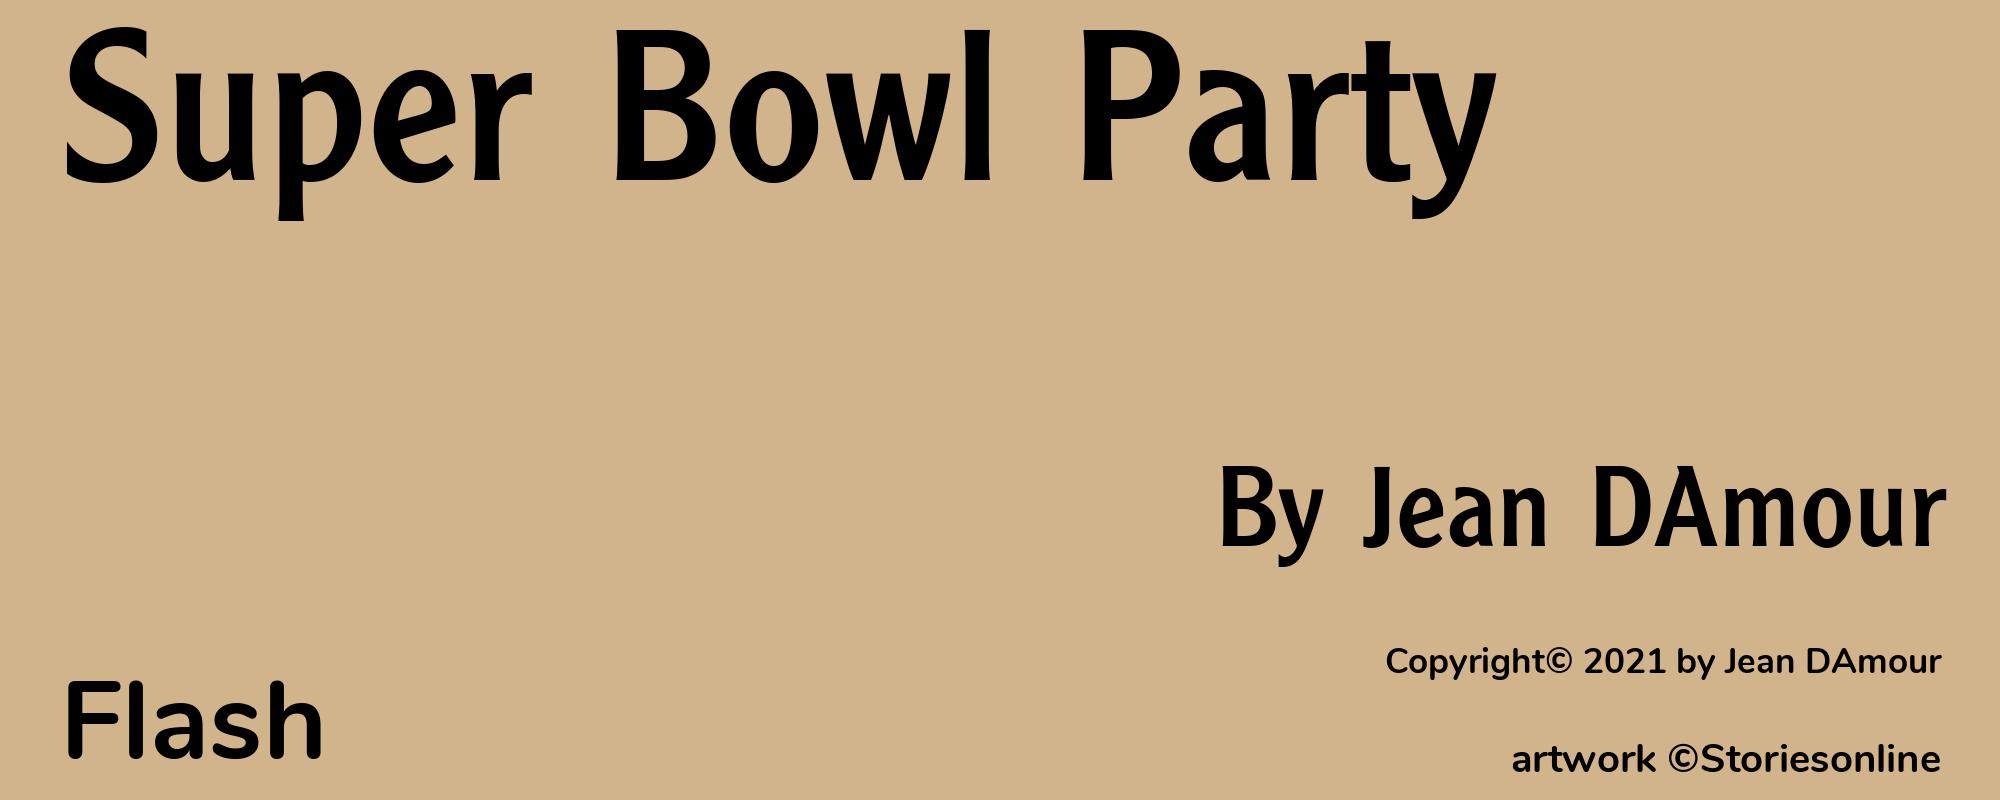 Super Bowl Party - Cover